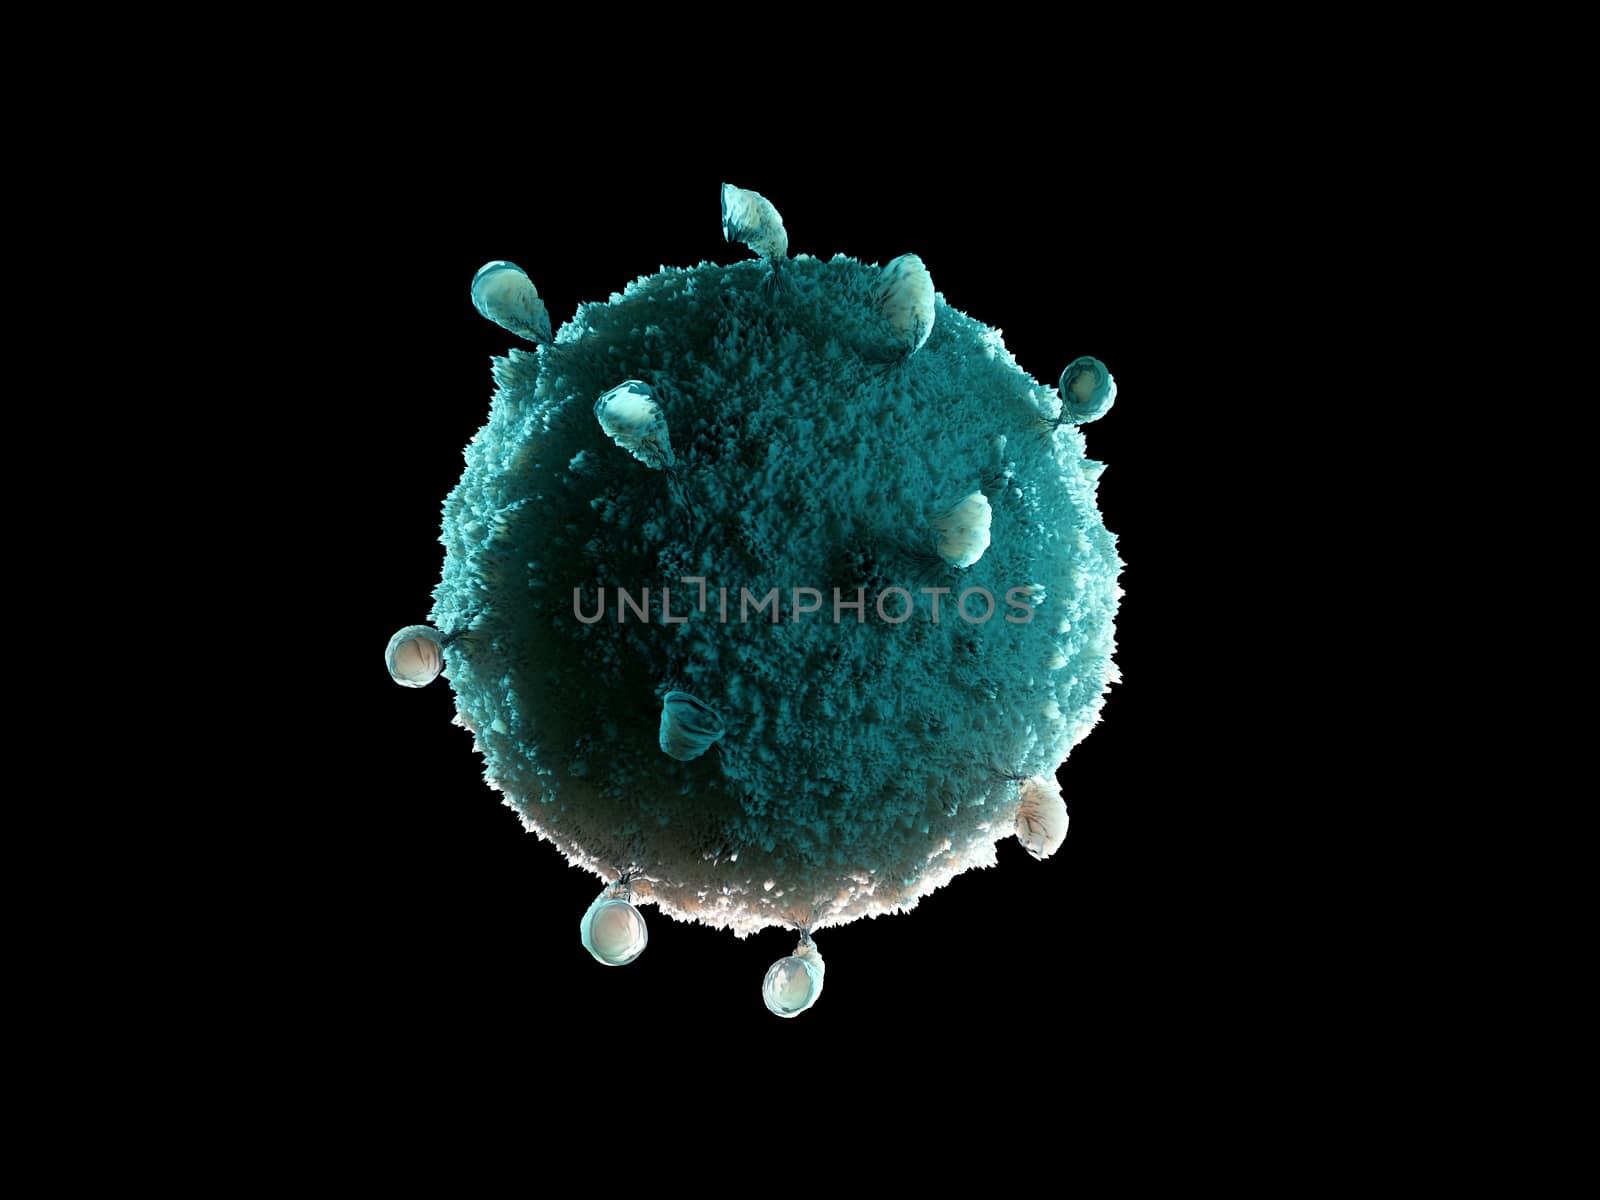 3d rendered Virus in Blood Stream in color background by tussik